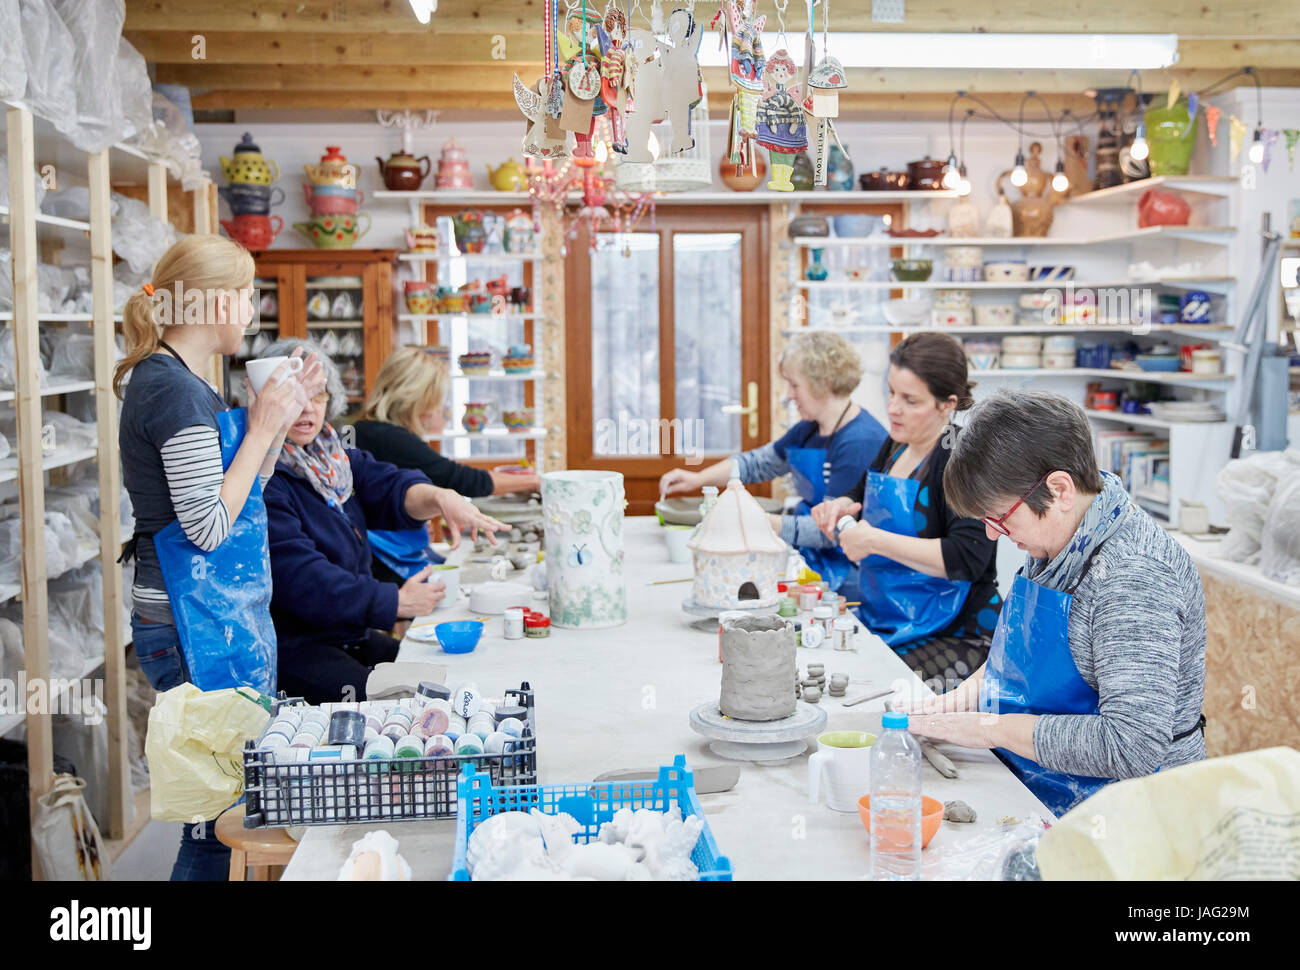 A group of people seated at a workbench in a pottery workshop, handbuilding clay objects. A woman with a cup of tea. Stock Photo